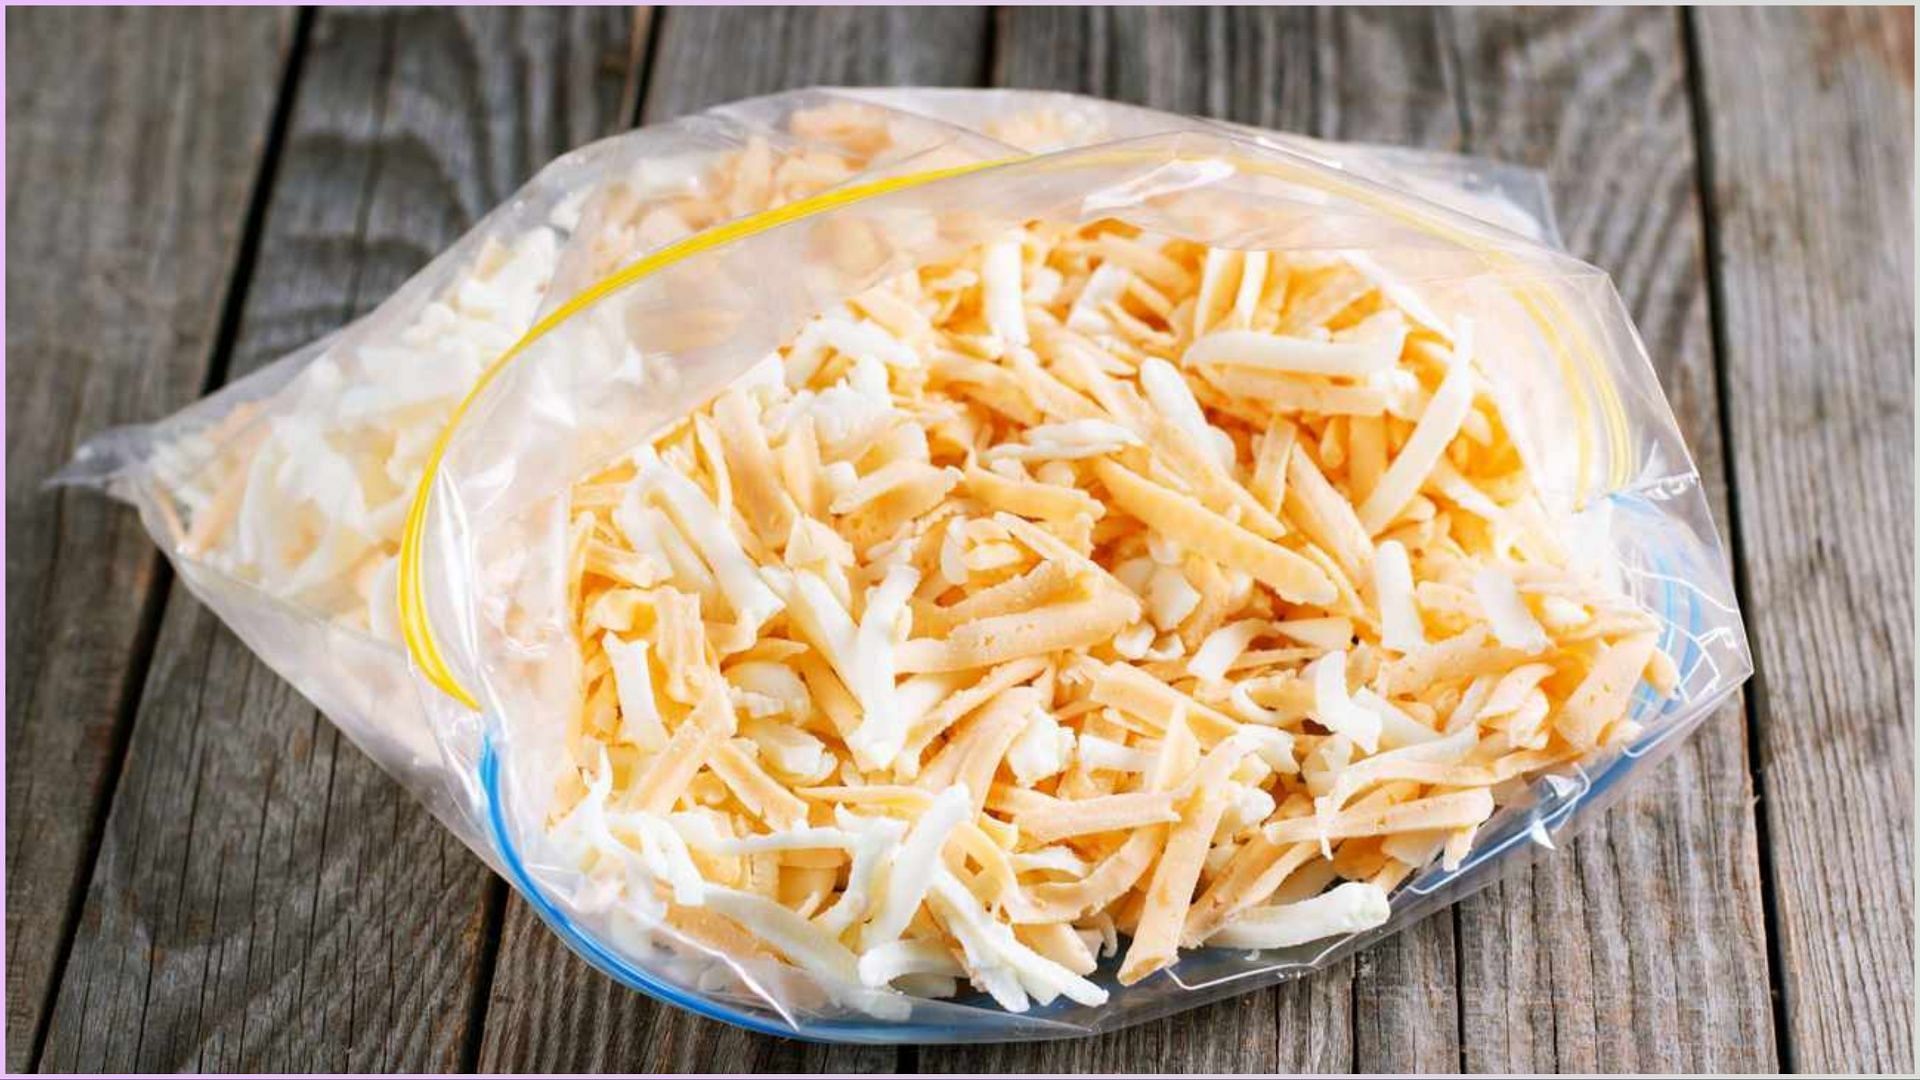 The products from the PICS Grated Cheese recall fail to meet the quality standards set by Price Chopper/Market 32 (Image via Qwart / Getty Images)